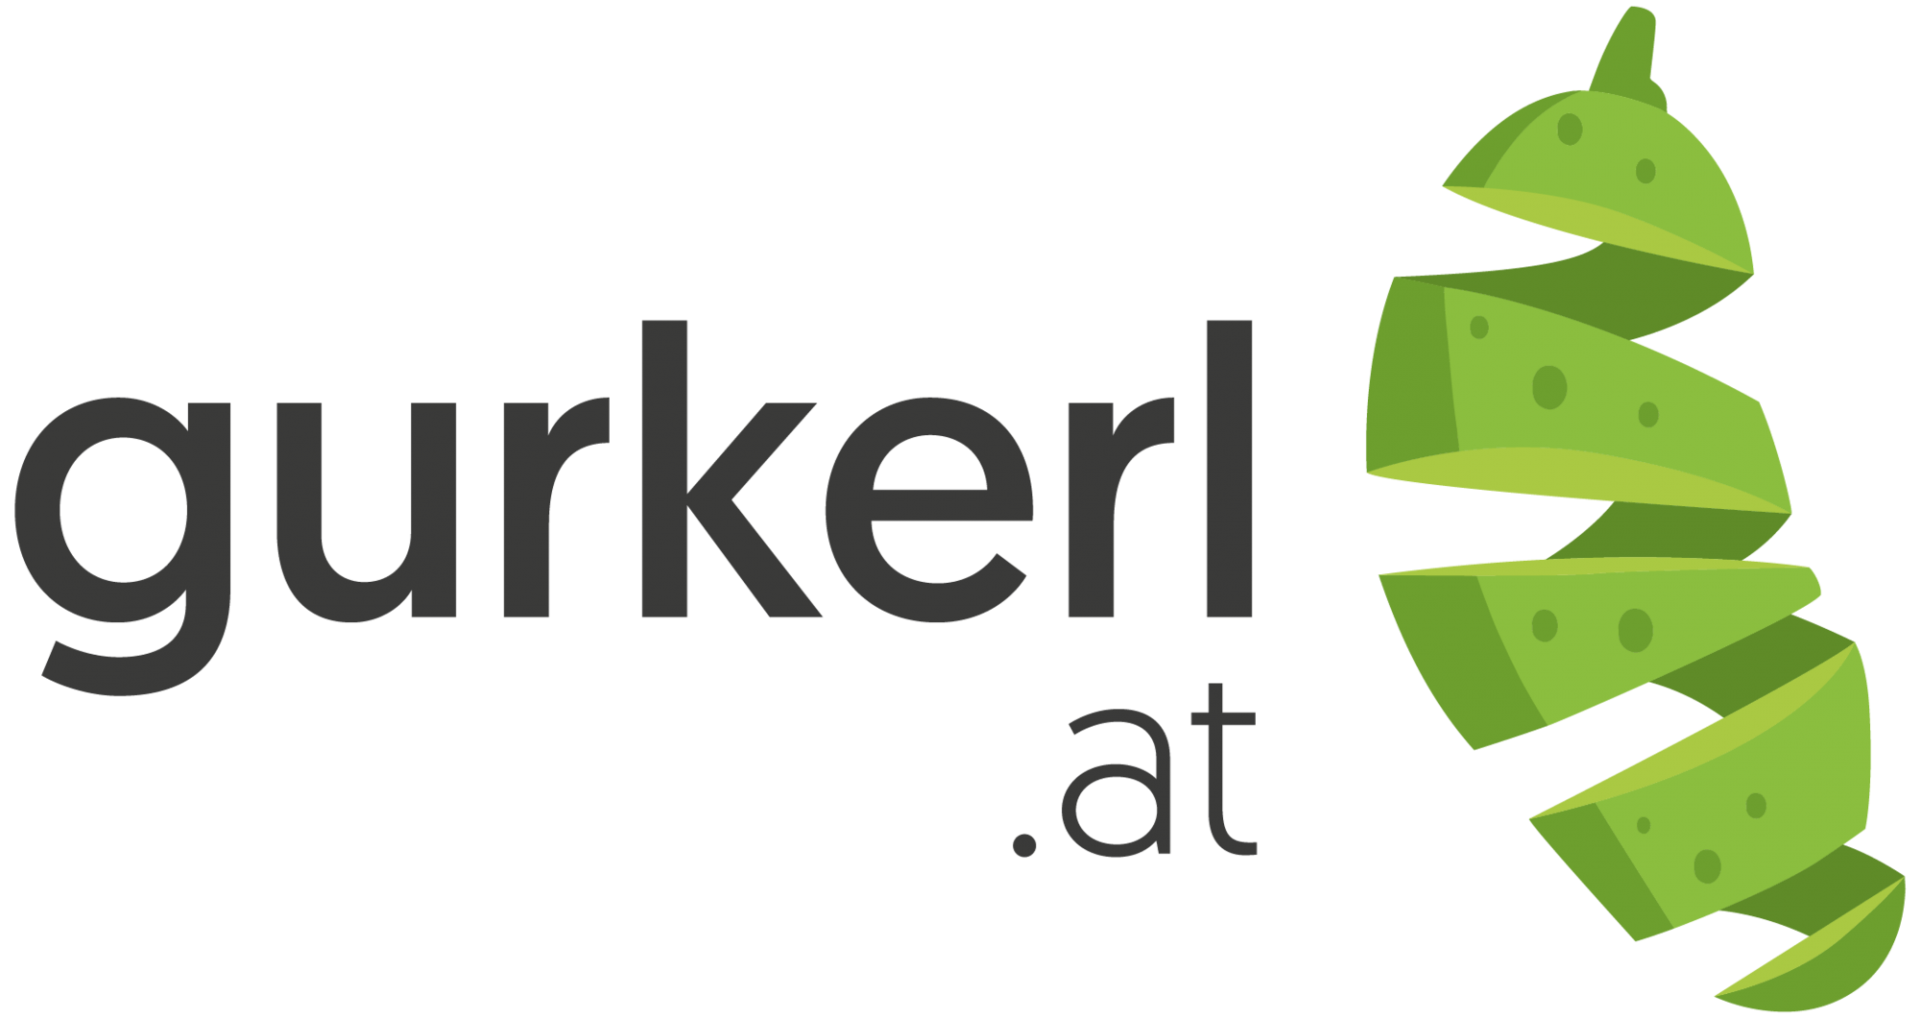 Gurkerl.at